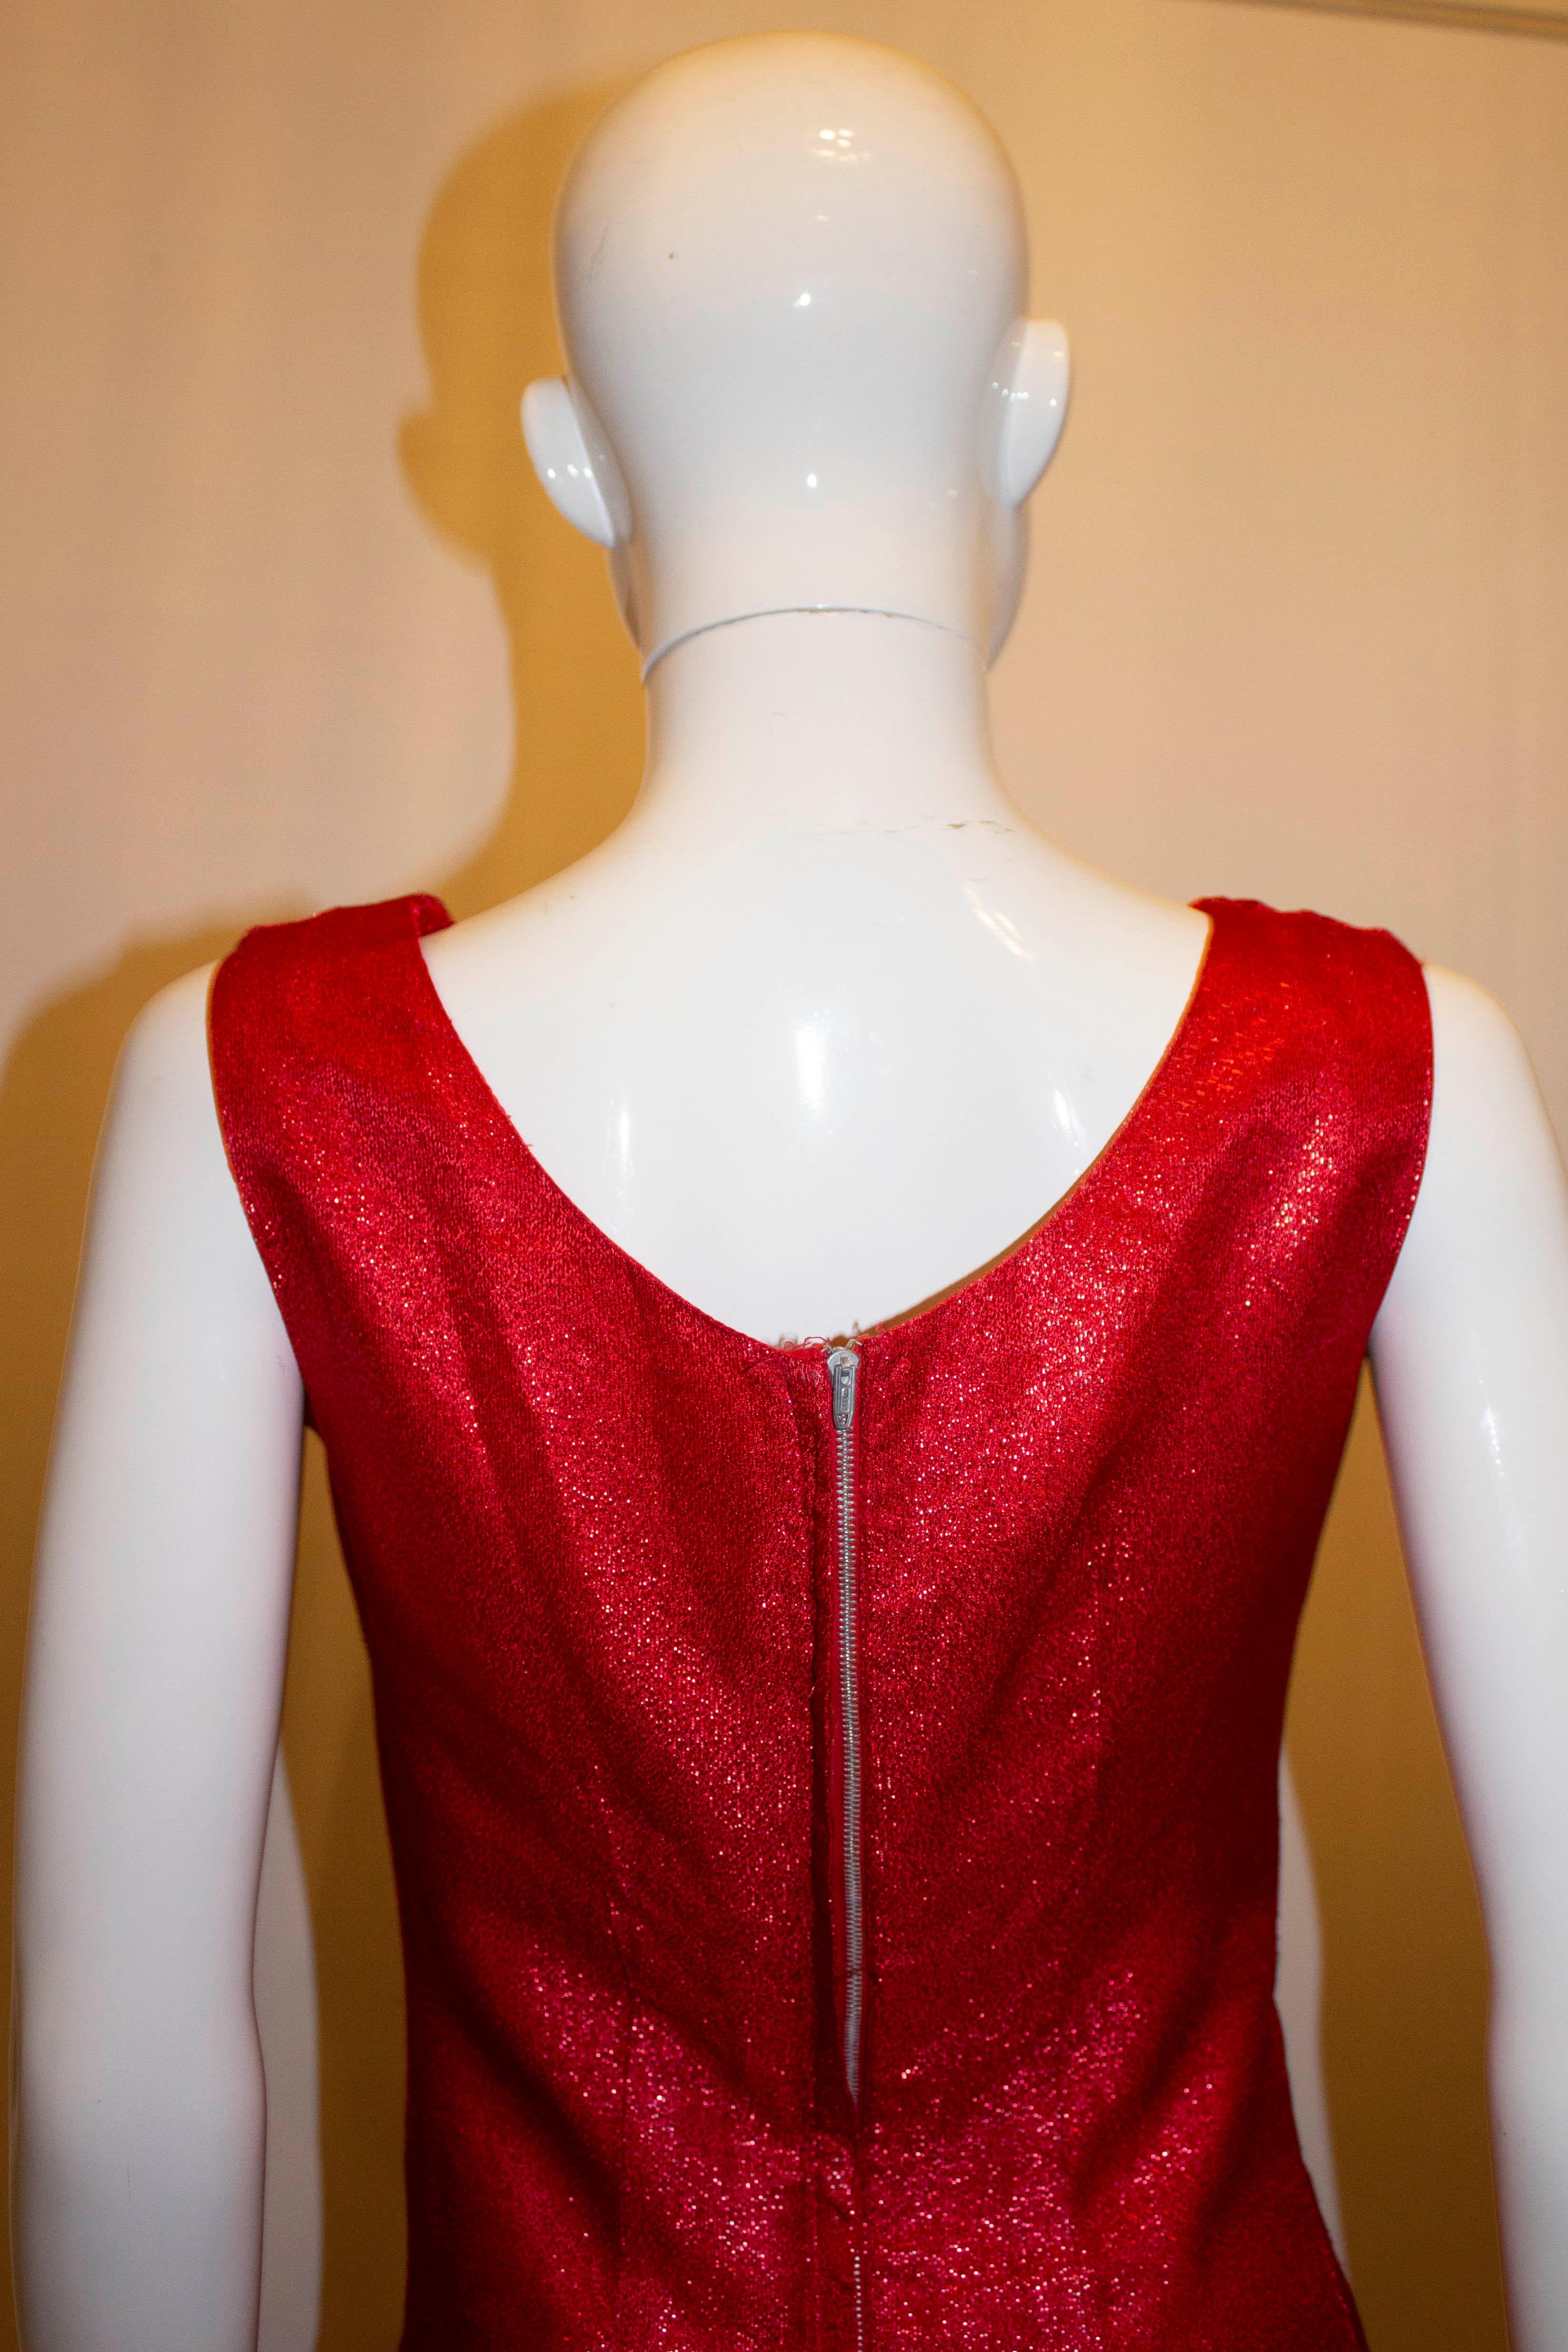 A lovely vintage cocktail dress for Fall/Winter. In a ruby red fabric, the dress has detail on the bodice and a scoop front line and backline. It is lined and has a central back zip.
Measurements: Bust 34'', length 40''